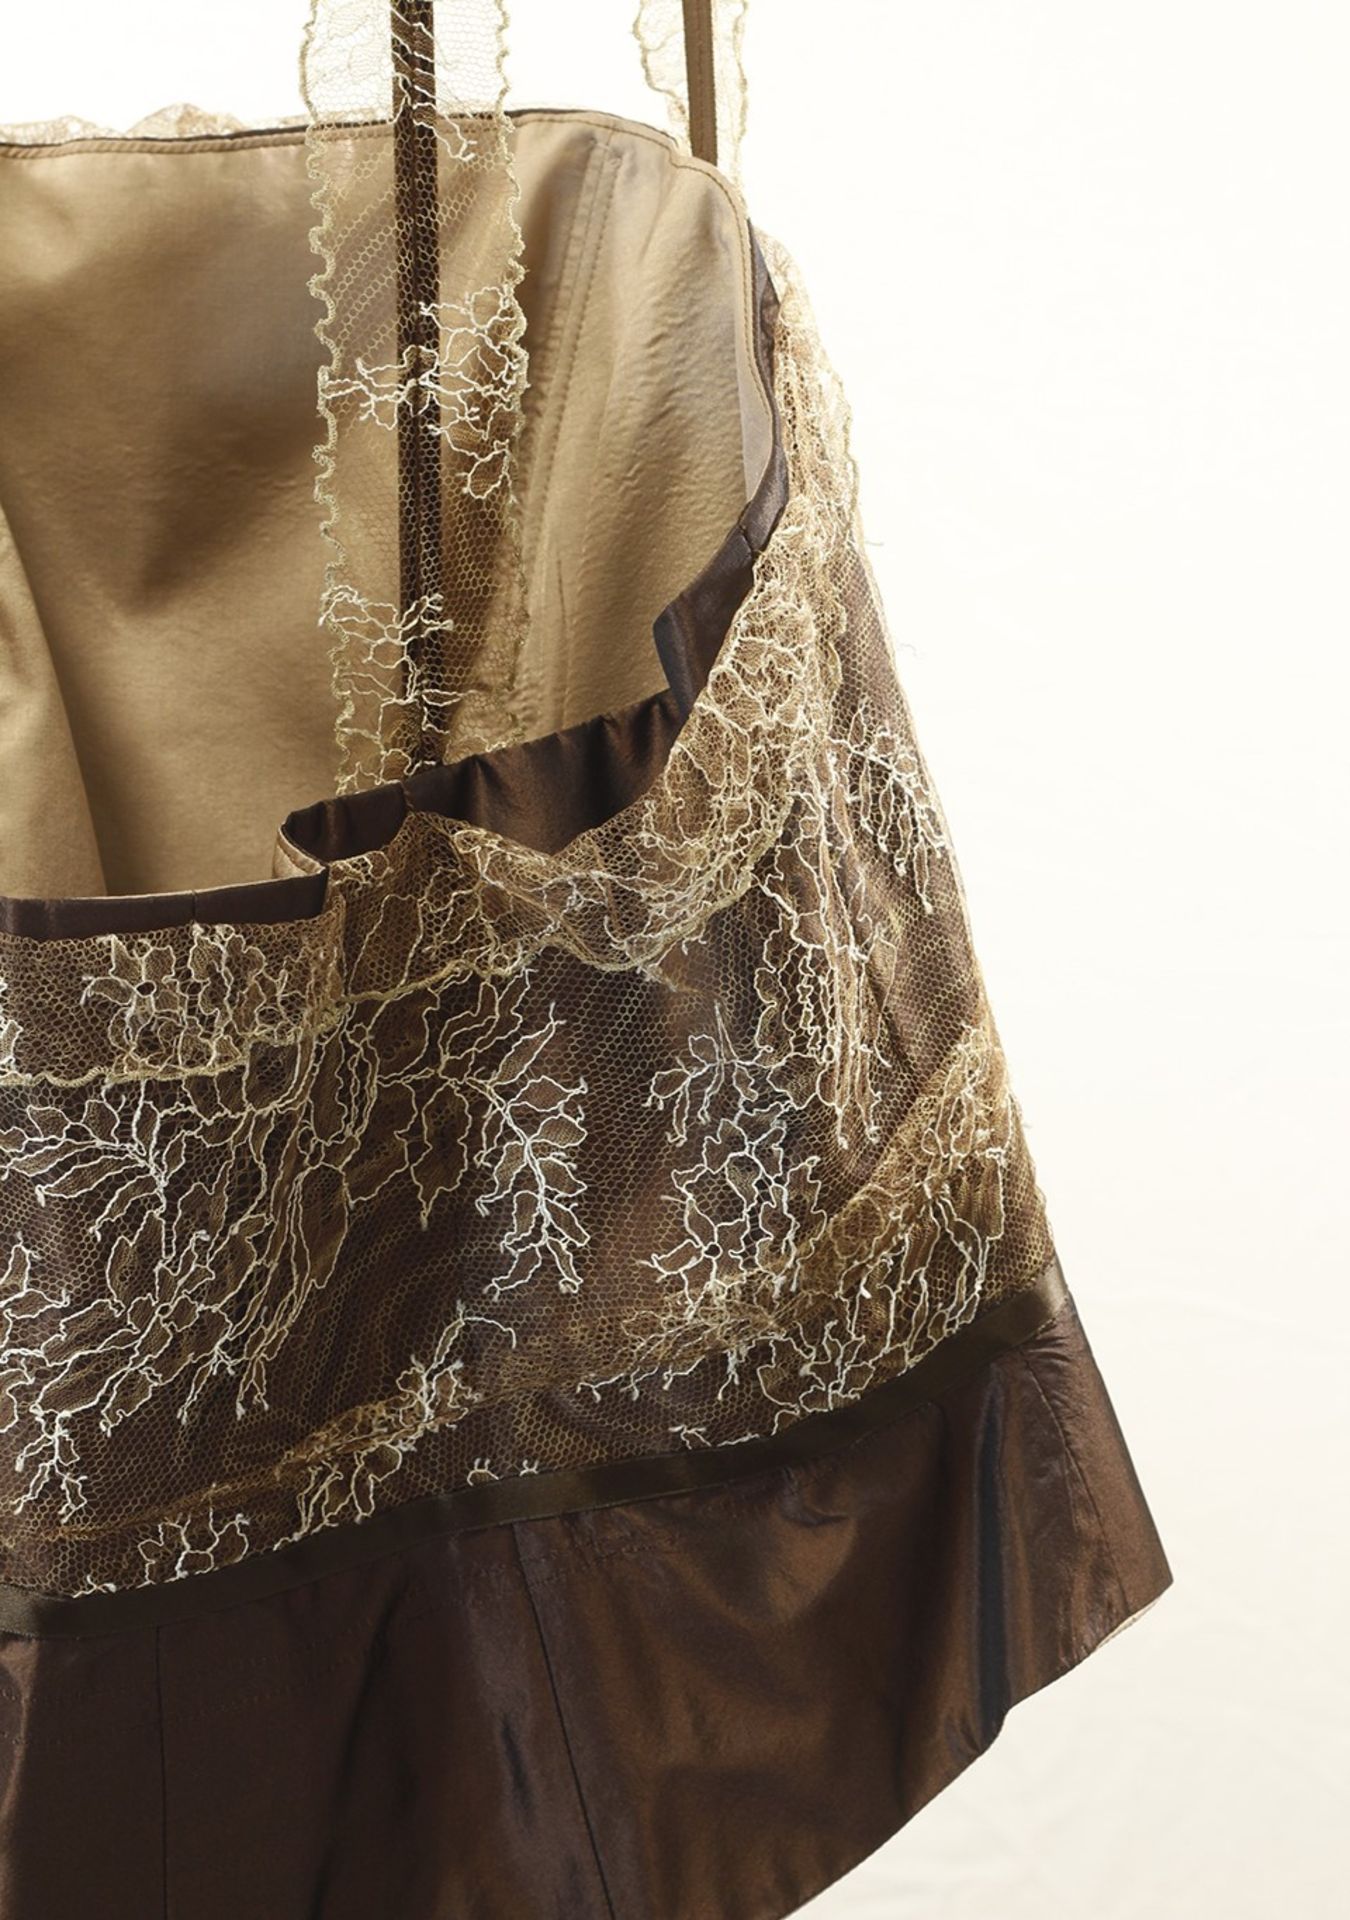 1 x Anne Belin Brown Halterneck - Size: 20 - Material: 100% Silk - From a High End Clothing Boutique - Image 5 of 6